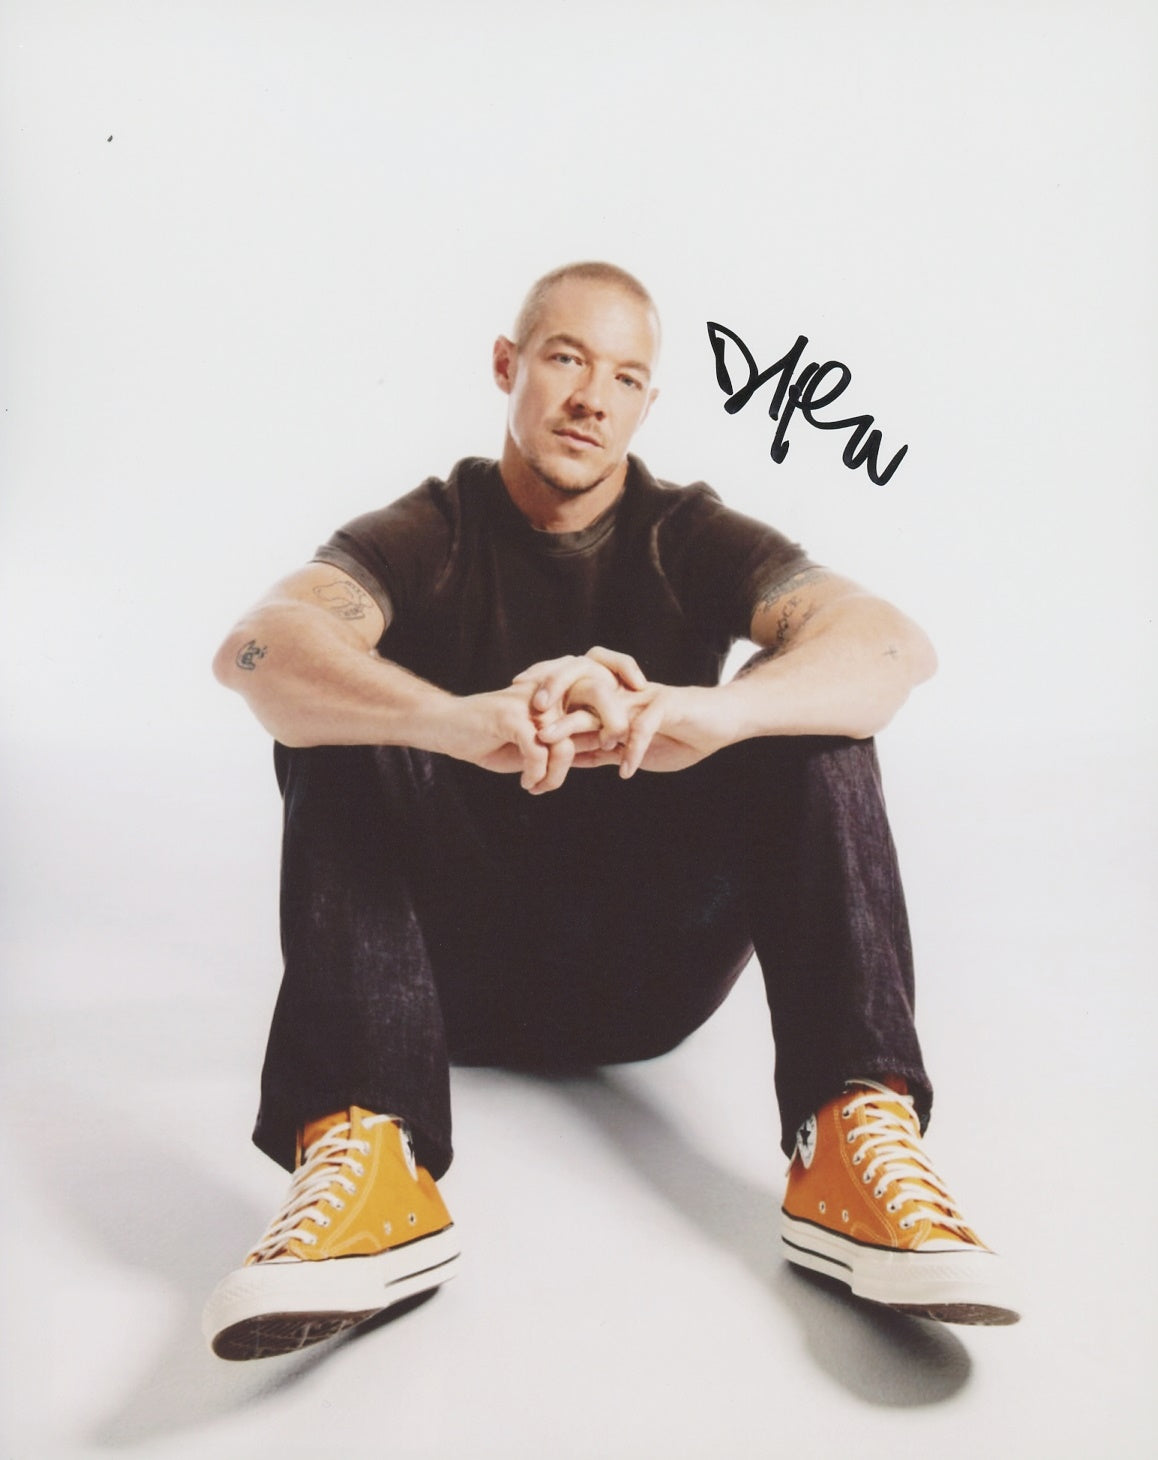 Diplo Signed 8x10 Photo - Video Proof